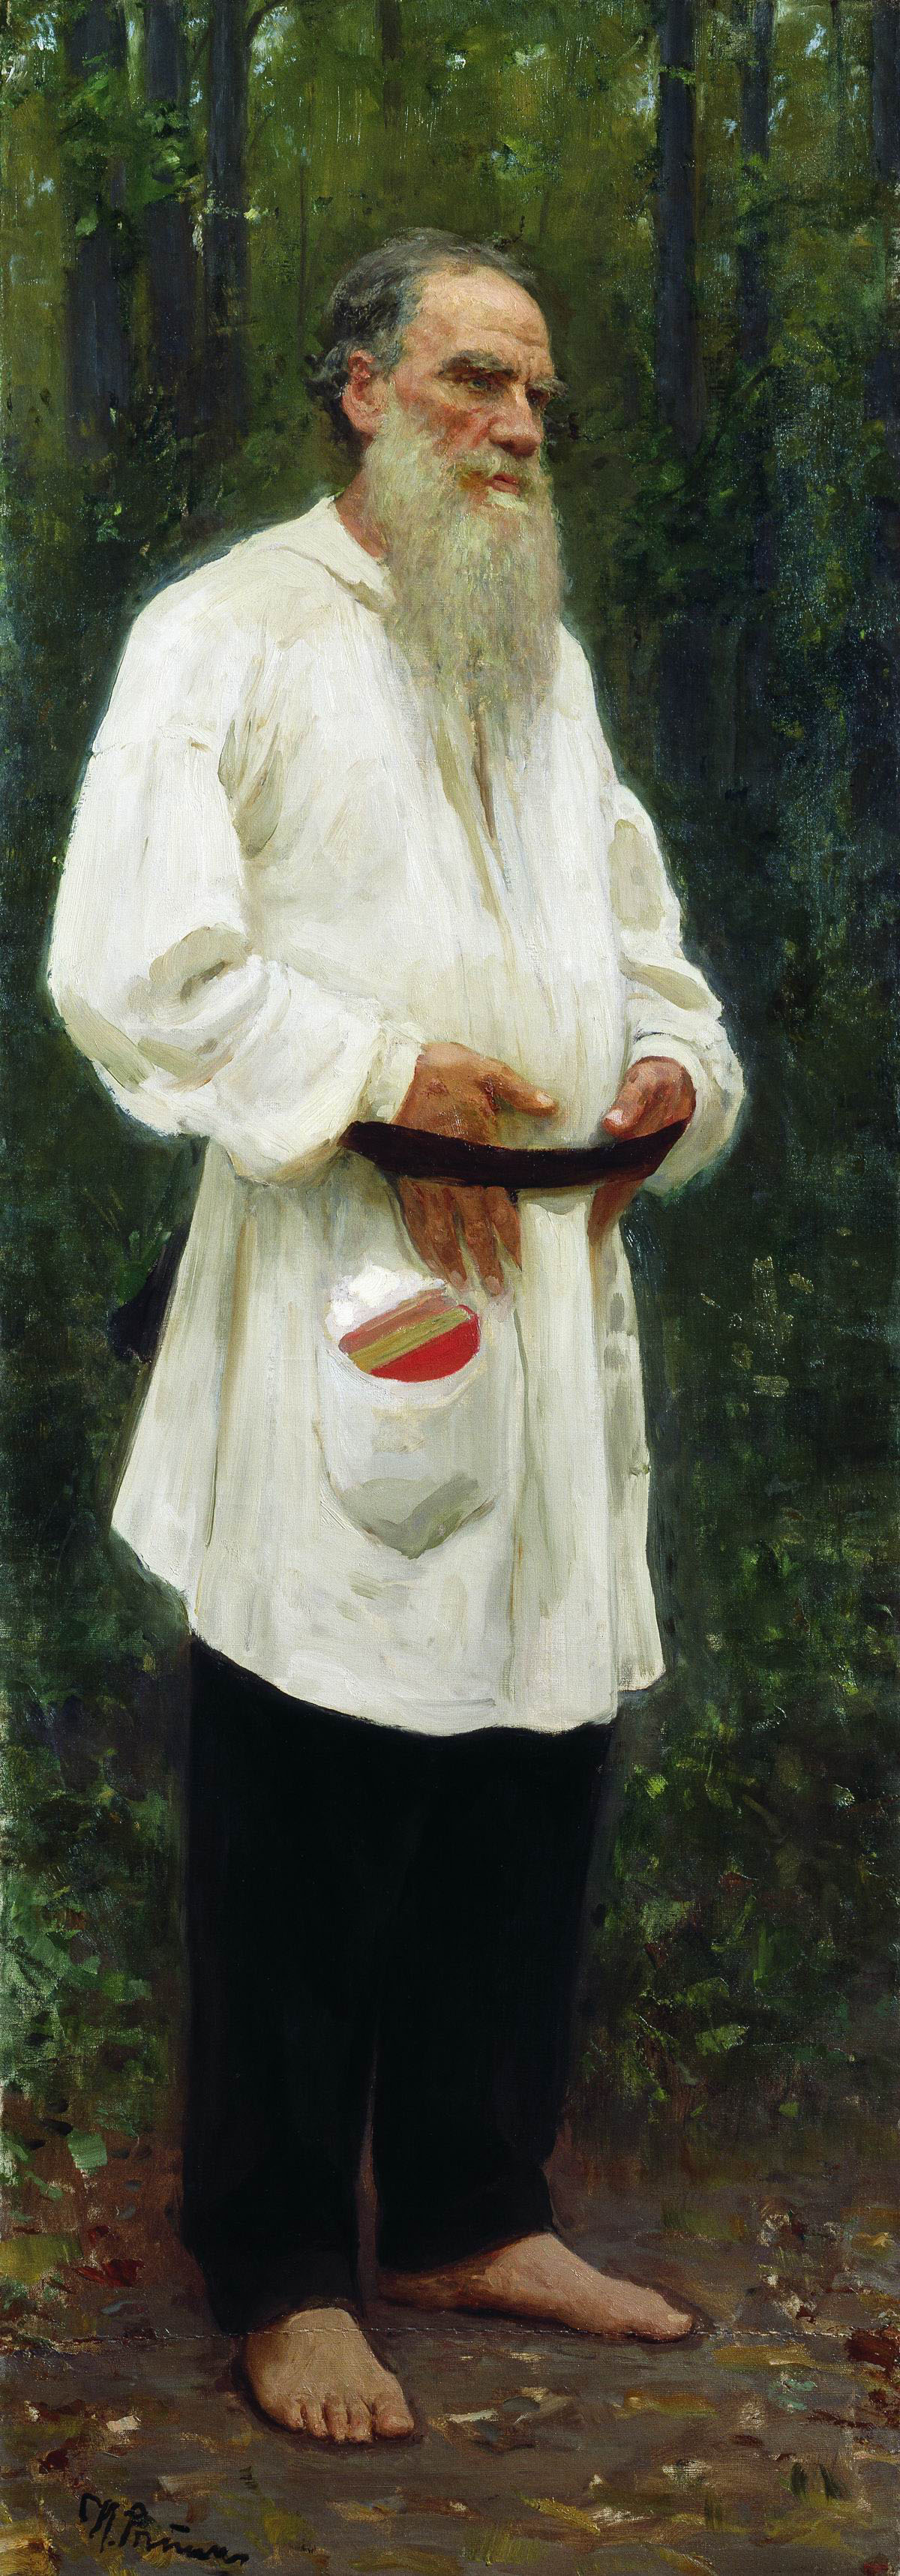 Tolstoy Dressed In Peasant Clothing by Ilya Repin